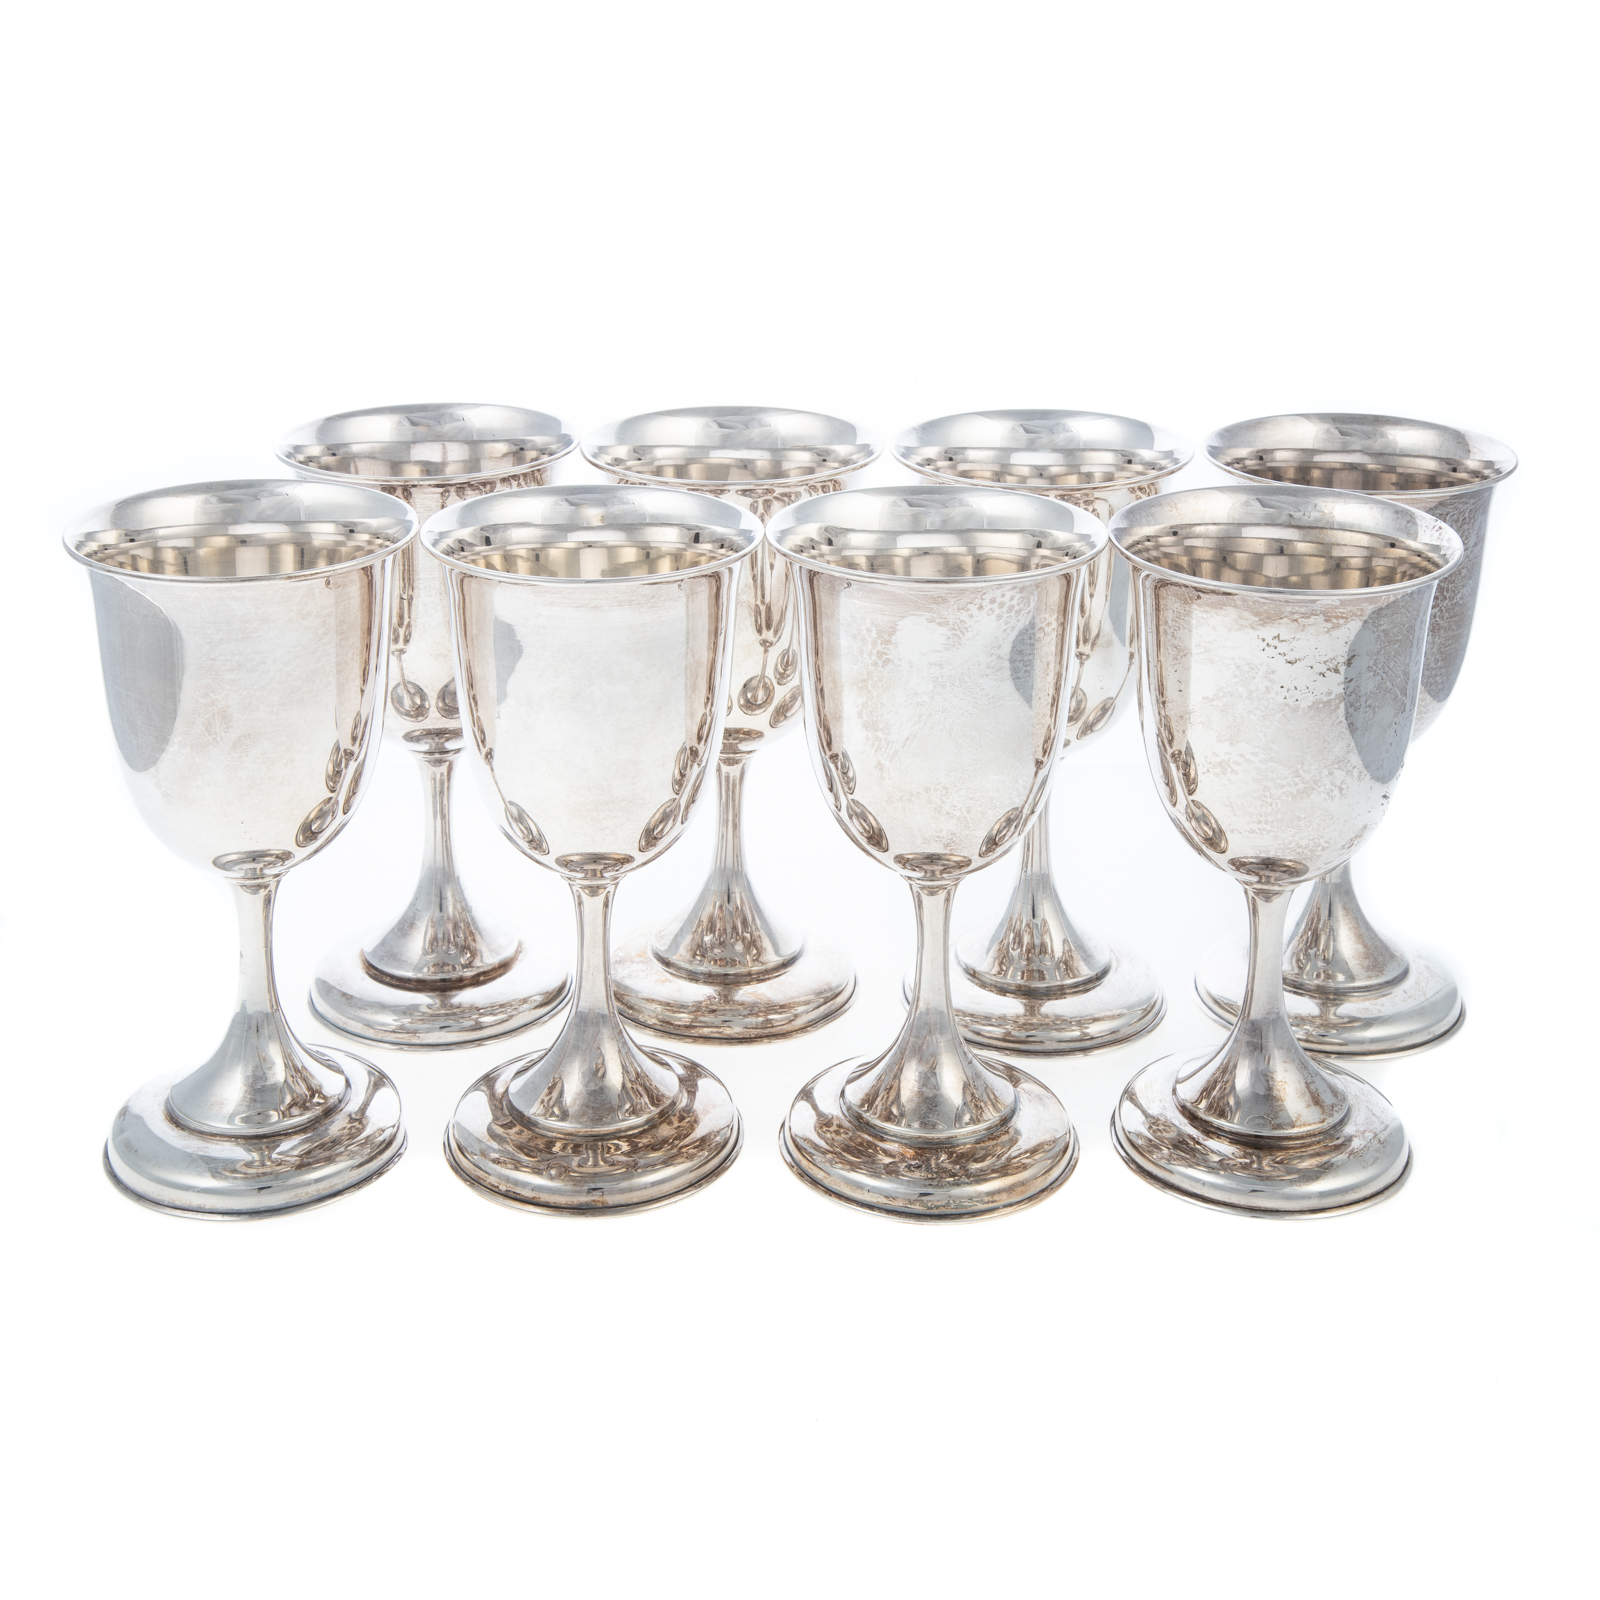 EIGHT STERLING GOBLETS 950 sterling